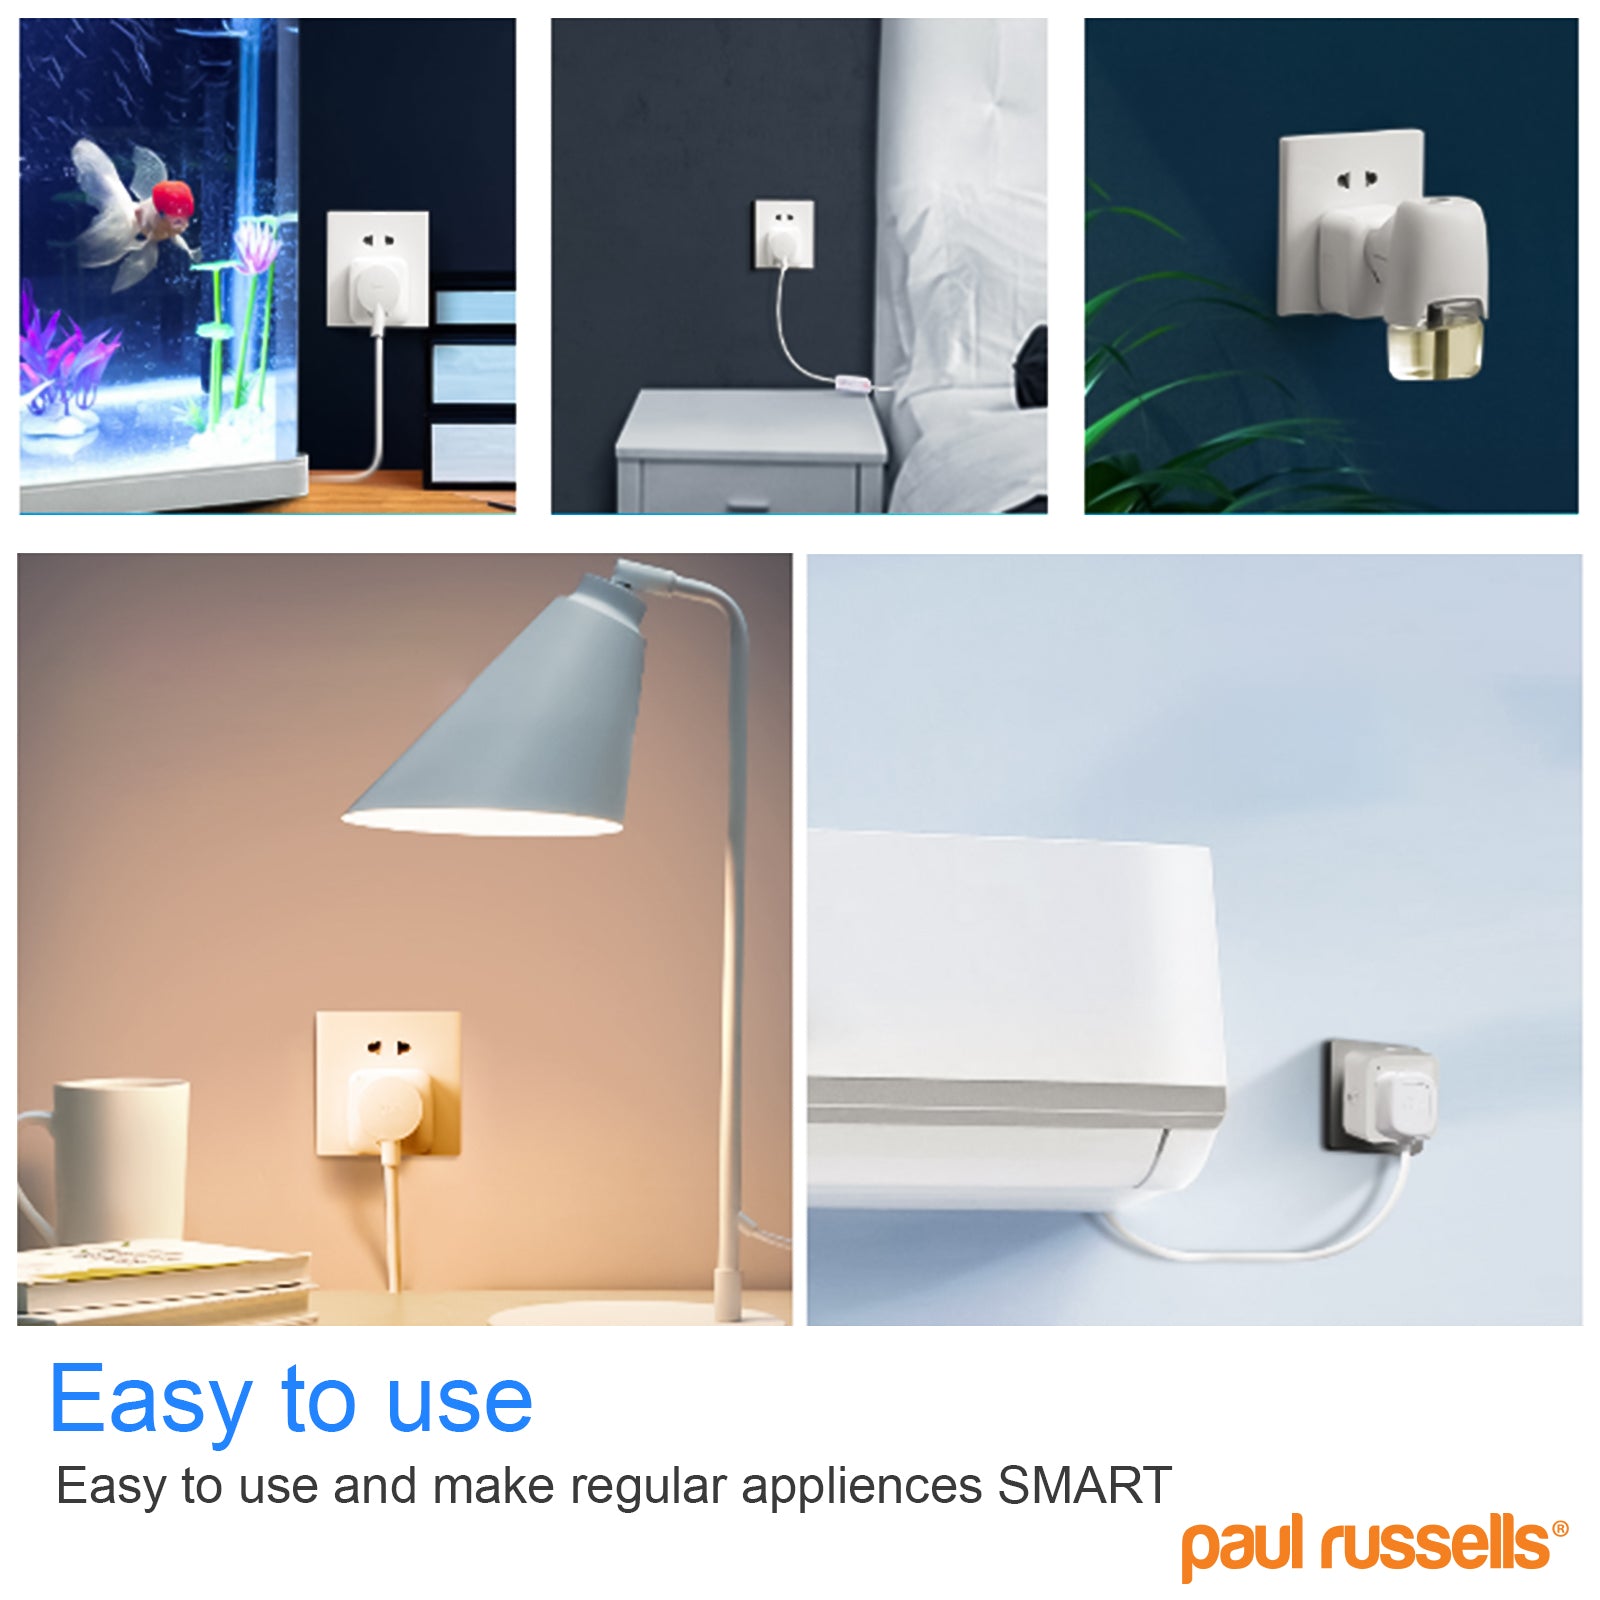 Smart Wireless Socket Plug works with Amazon Alexa/Google/Siri paul russells App Runs on 2. 4GHz WiFi Router/Bluetooth Remote Control, No Hub Required, Timer Switch, Home Devices